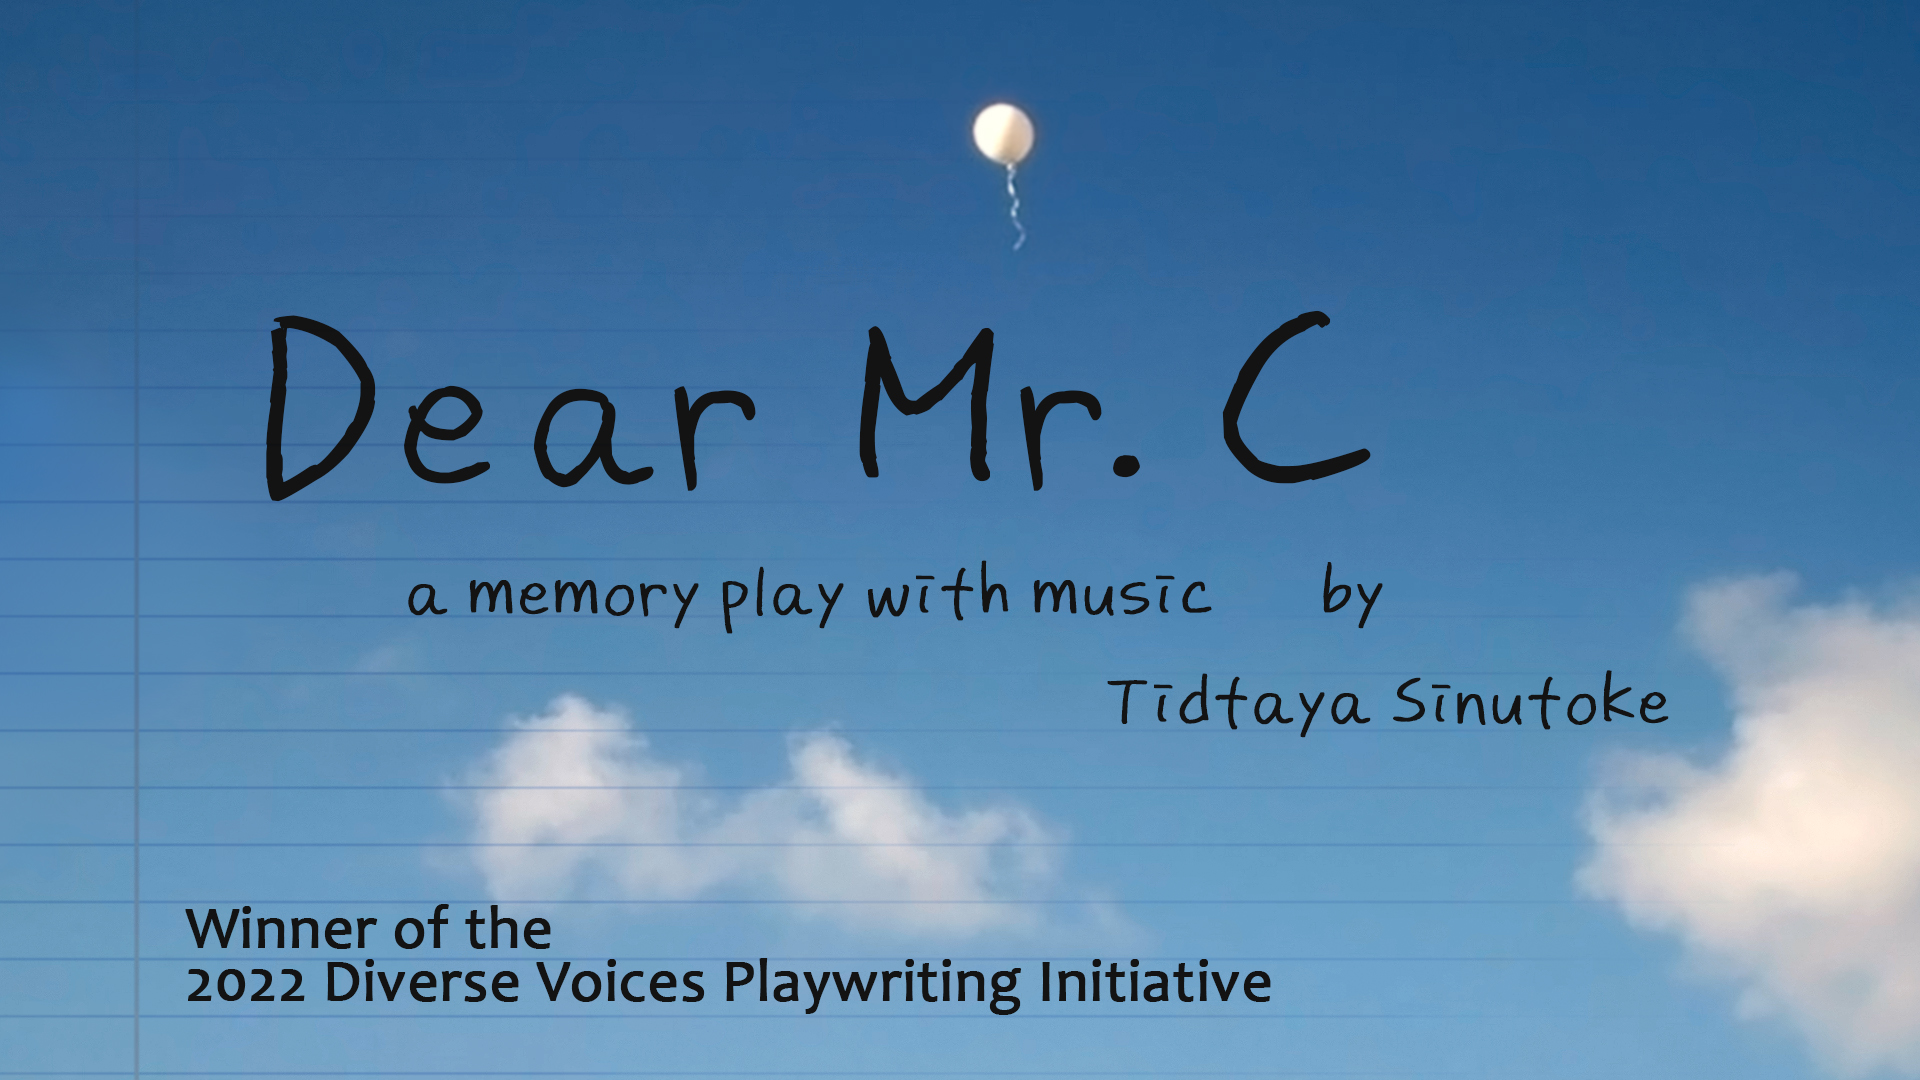 Dear Mr. C a memory play with music by Tidtaya Sinutoke poster. A blue sky with white clouds.